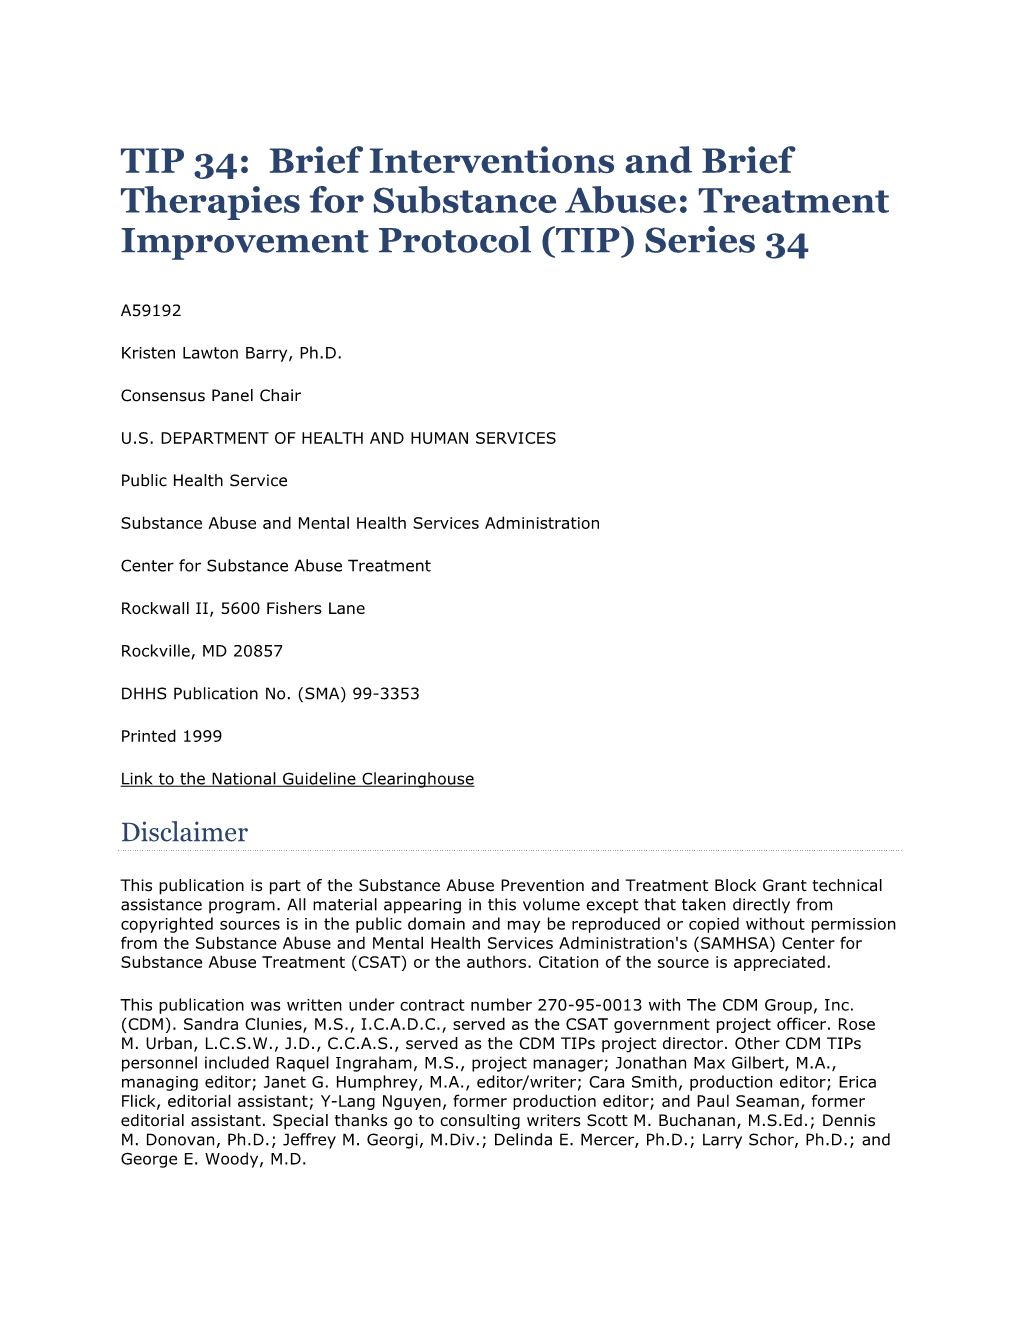 Brief Interventions and Brief Therapies for Substance Abuse: Treatment Improvement Protocol (TIP) Series 34